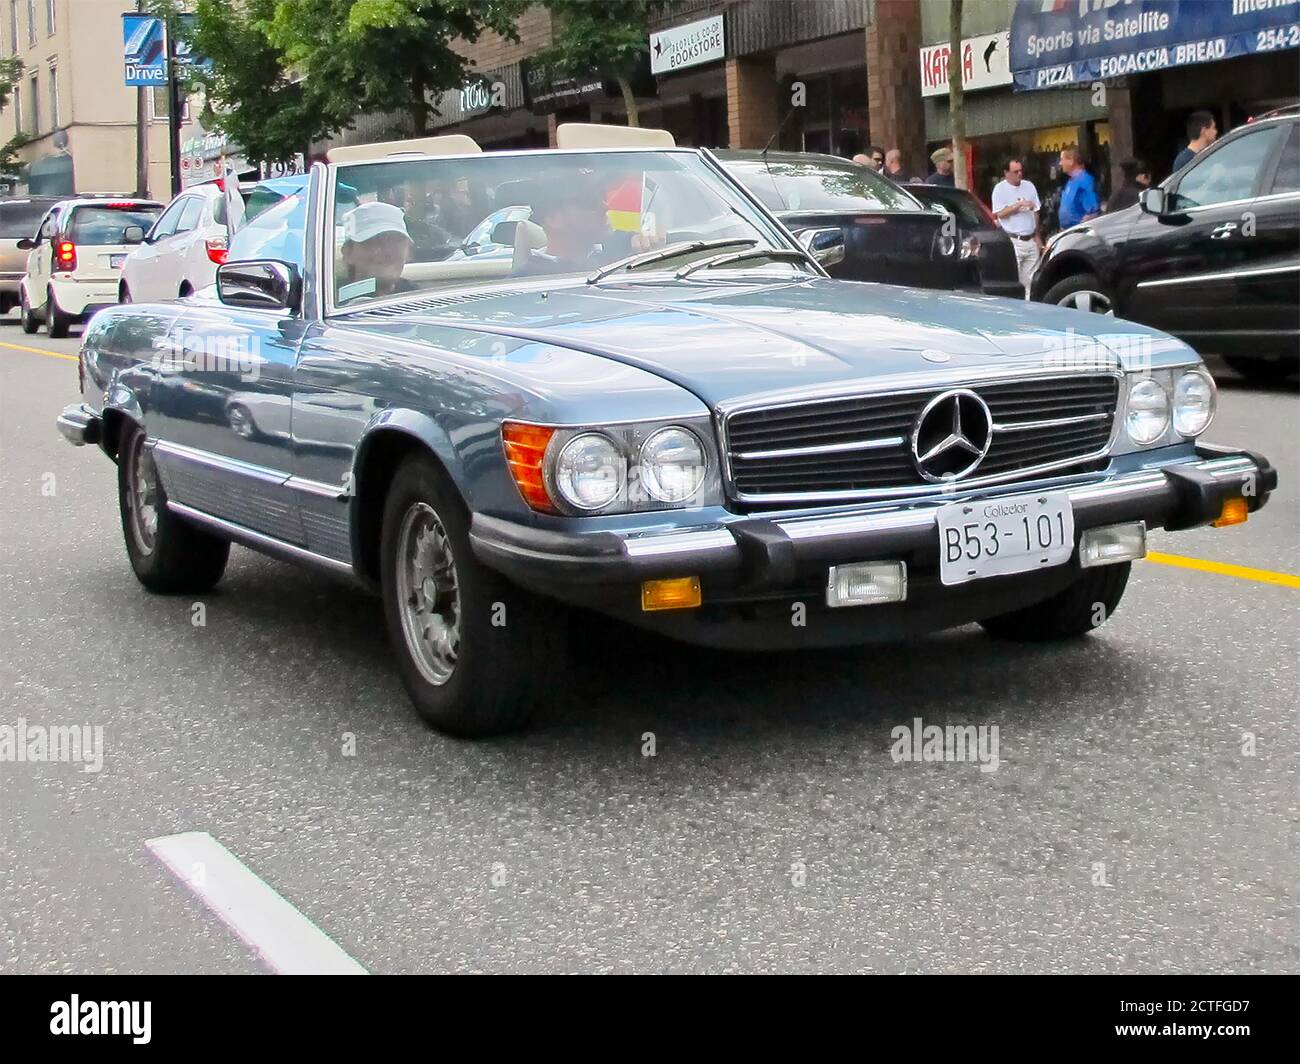 Blue colored Mercedes-Benz convertible Coupe sports car with detachable roof seen in traffic in downtown Vancouver city, Canada, Northern America Stock Photo